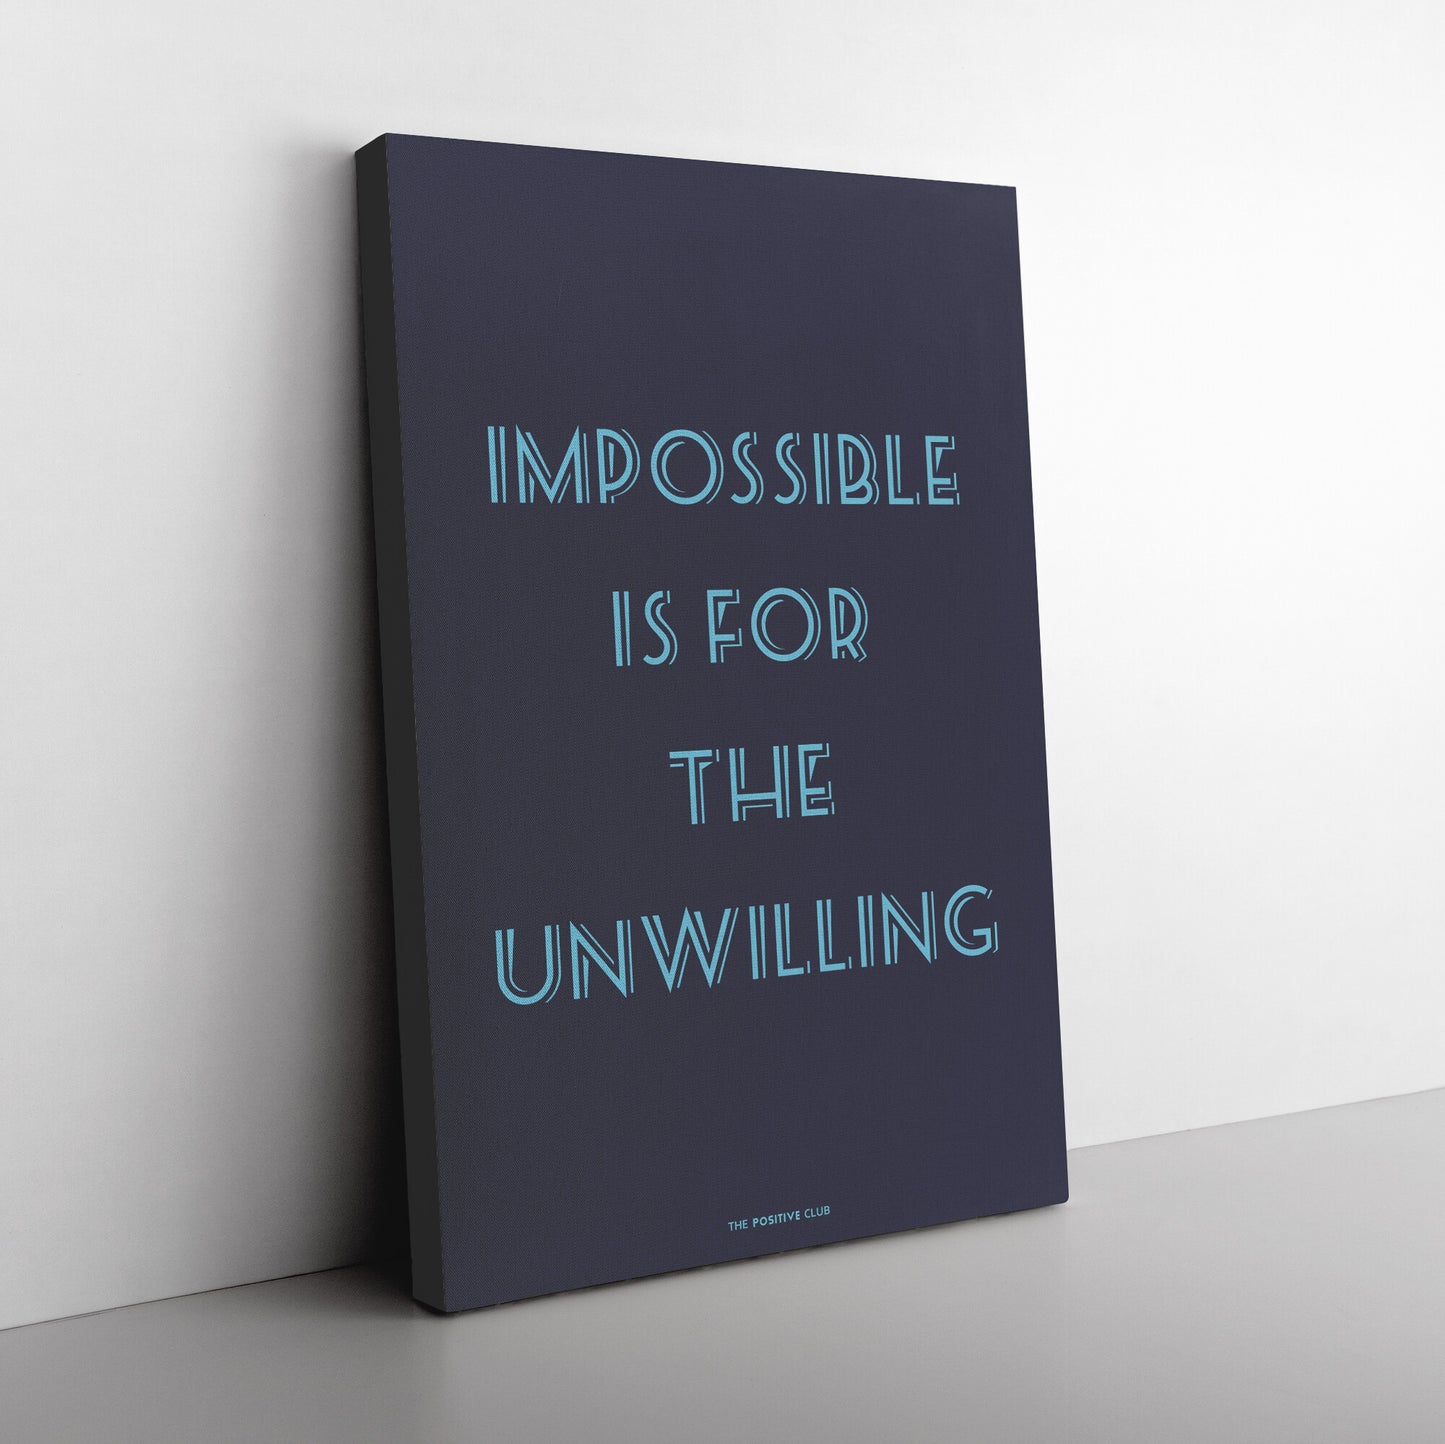 IMPOSSIBLE IS FOR THE UNWILLING